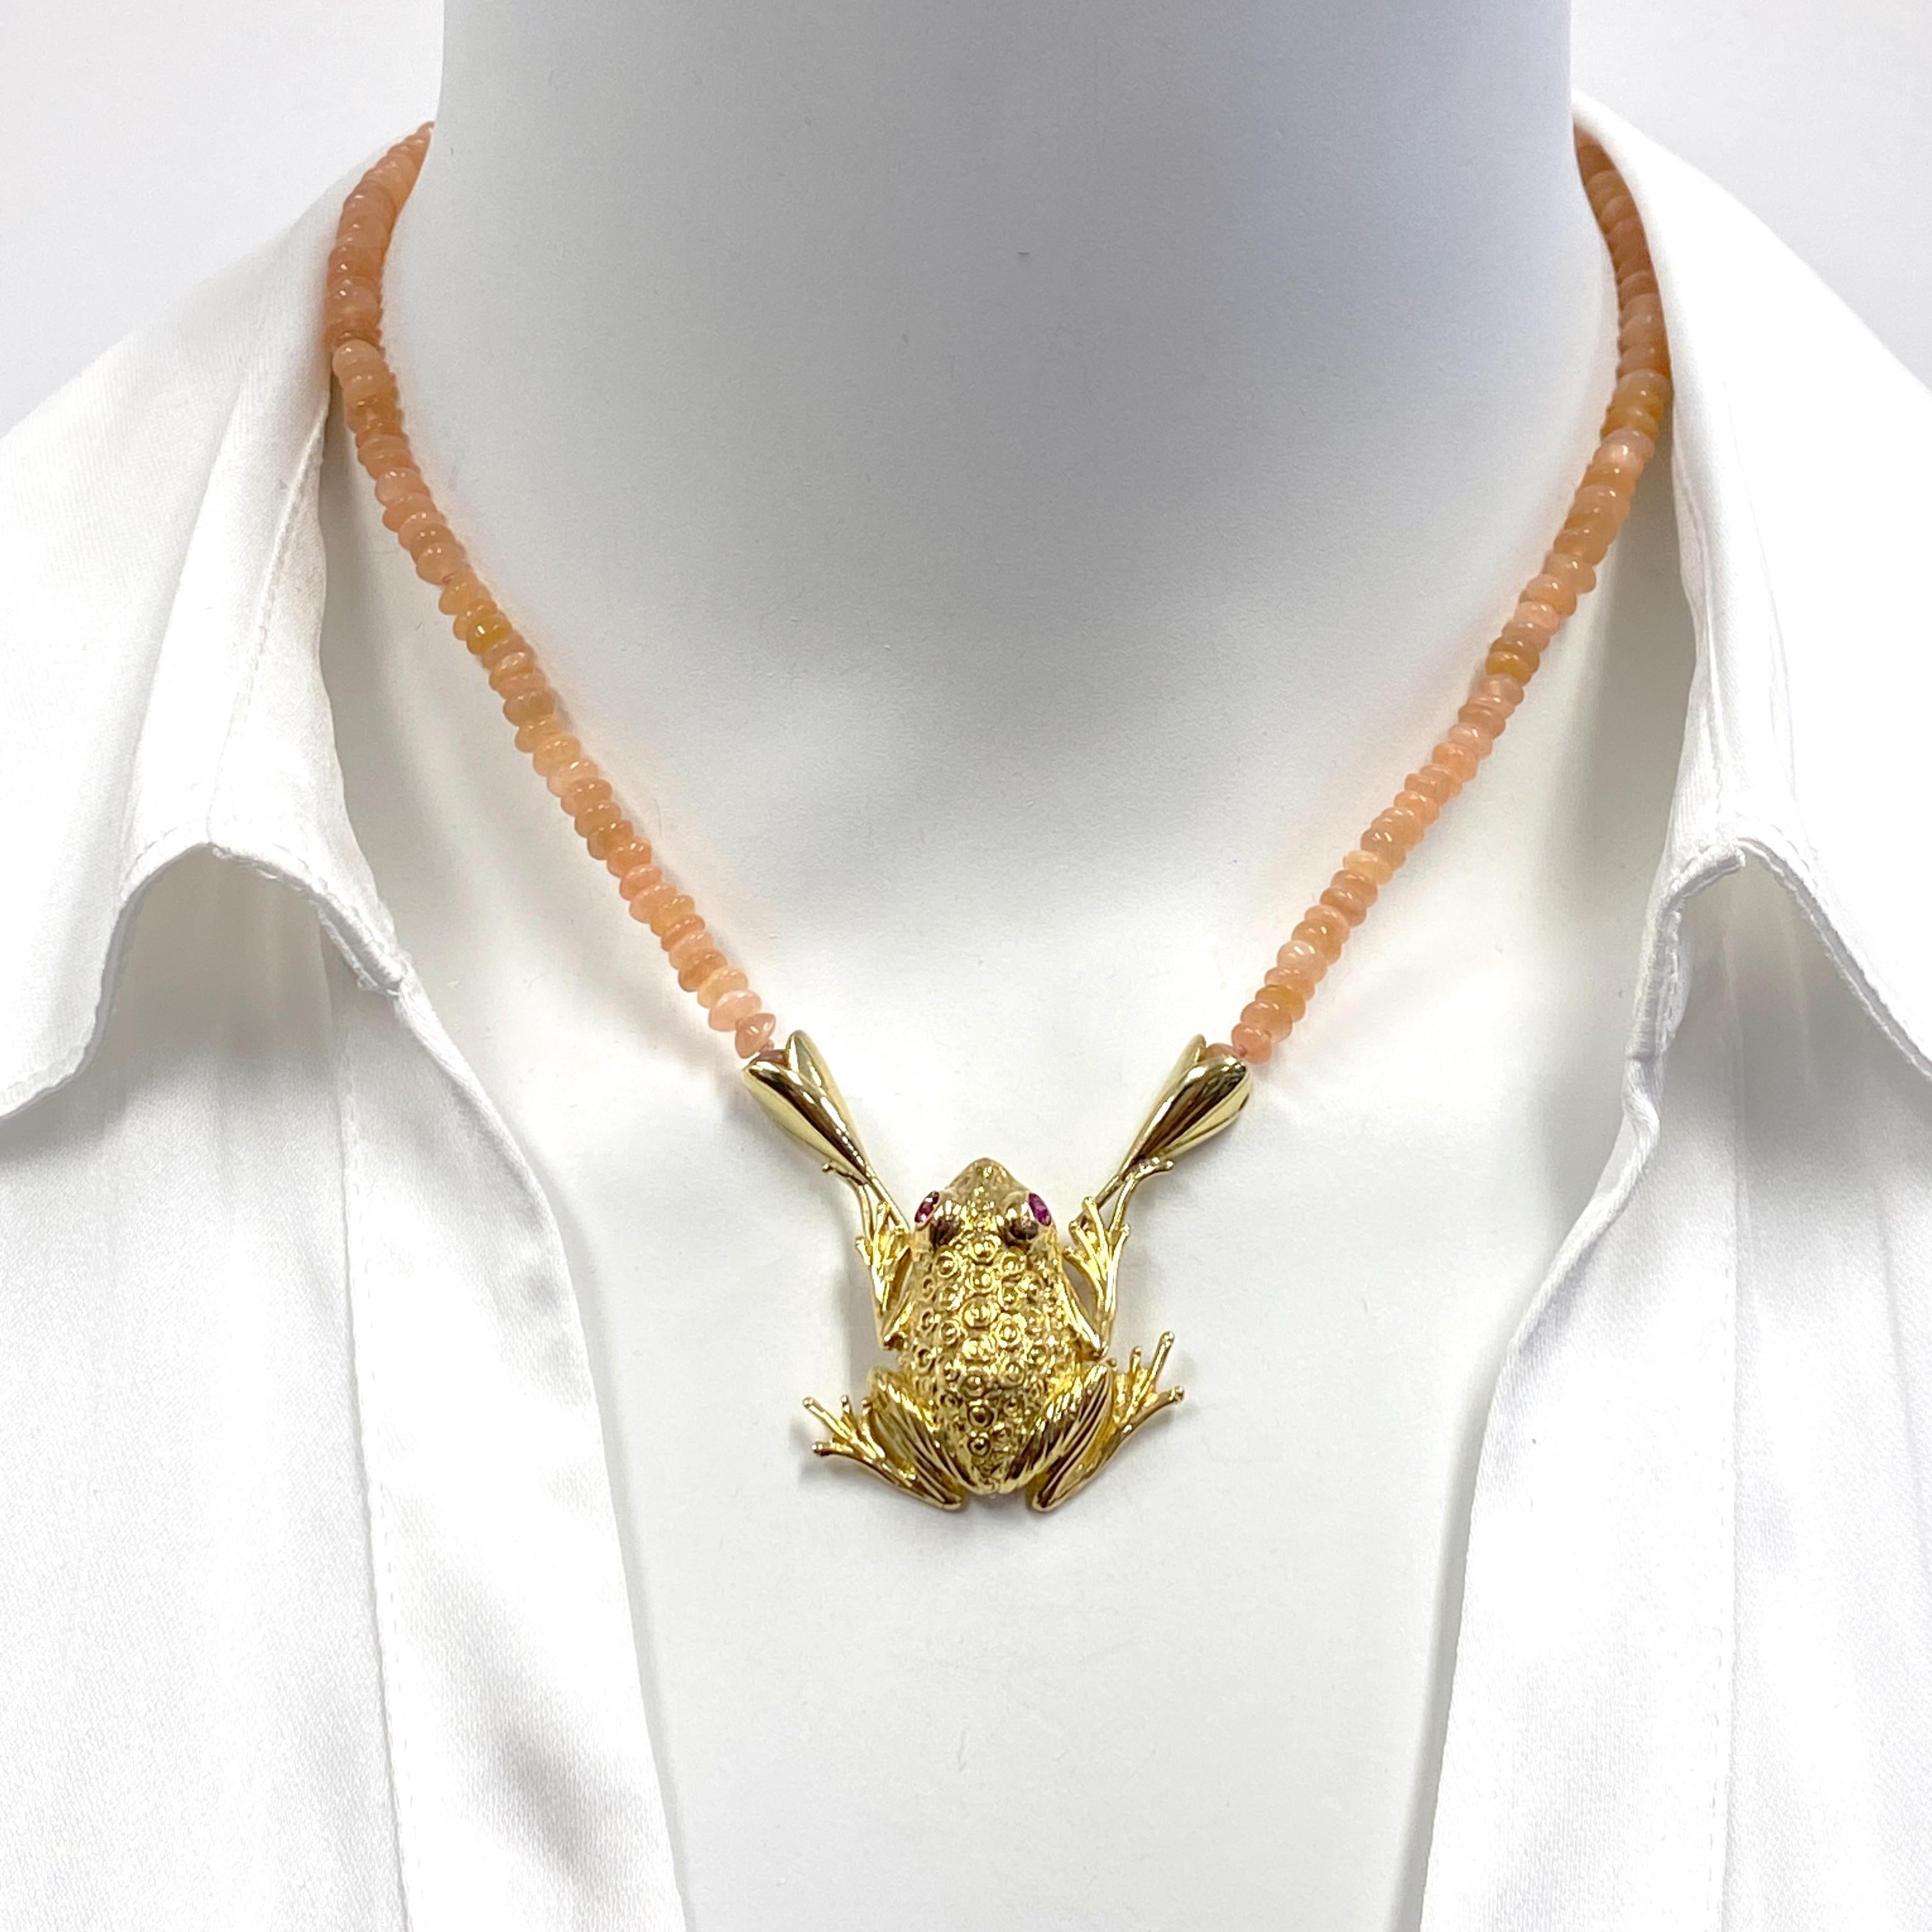 This unique (literally -- there's only one) new necklace from Eytan Brandes combines a vintage frog brooch, converted to a pendant, with a strand of peach moonstone beads and 